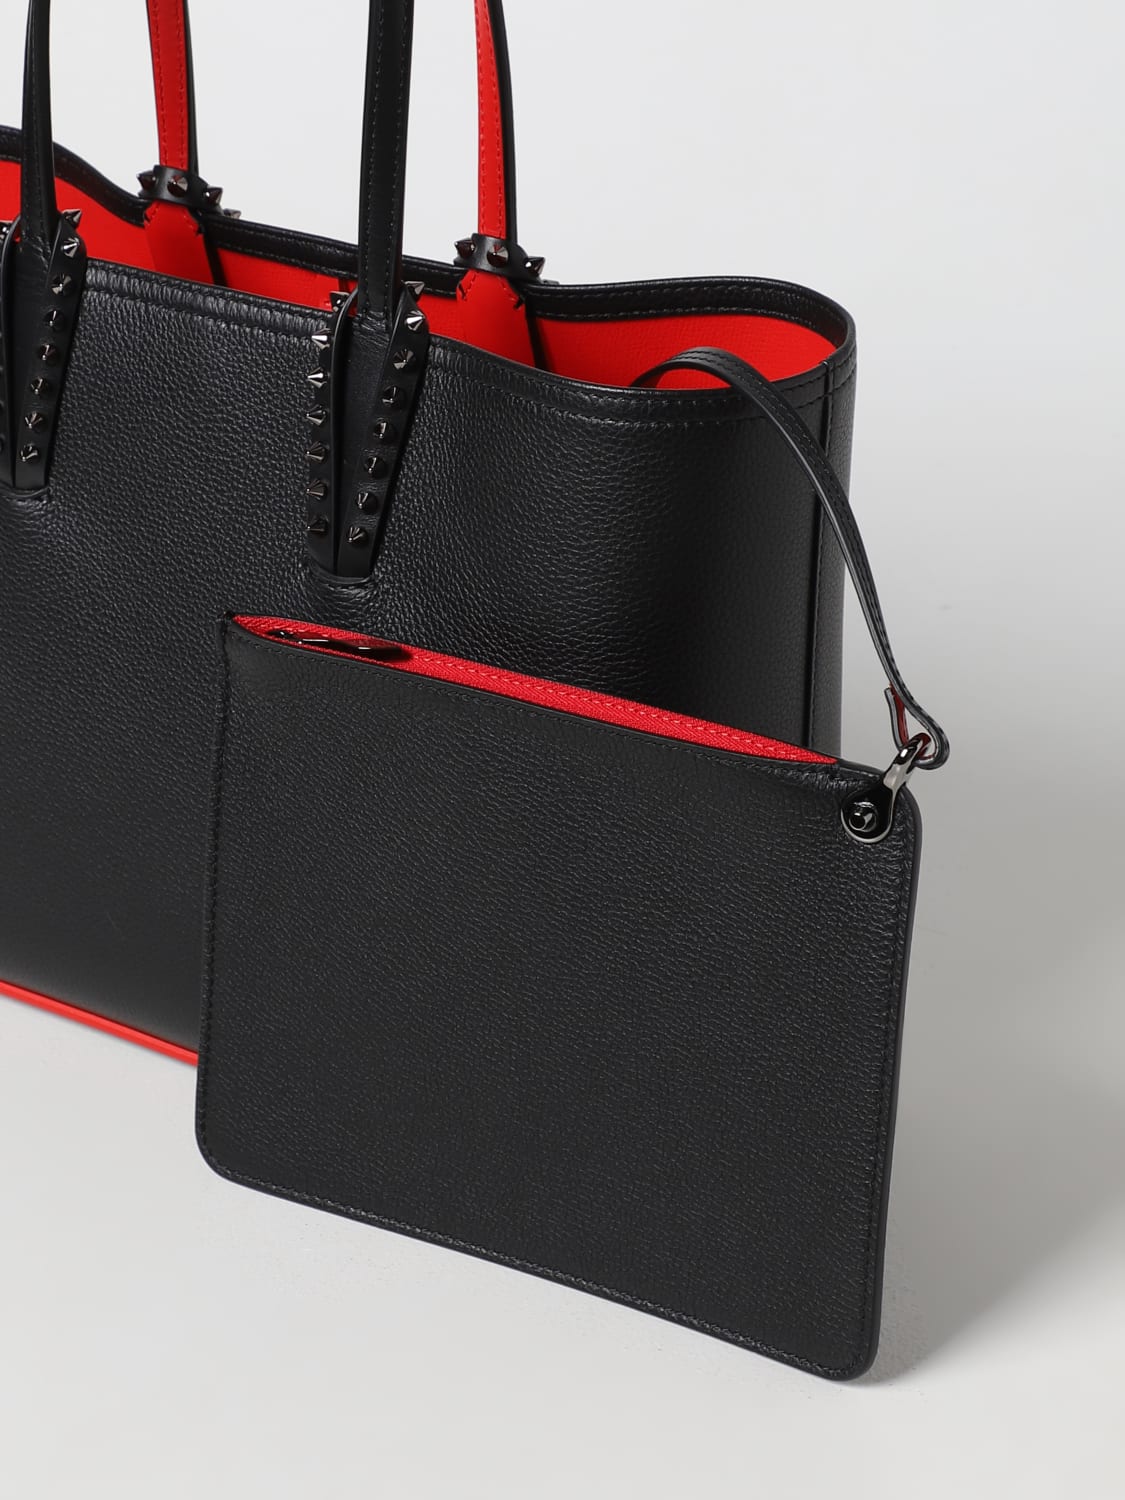 christian louboutin tote bag and wallet